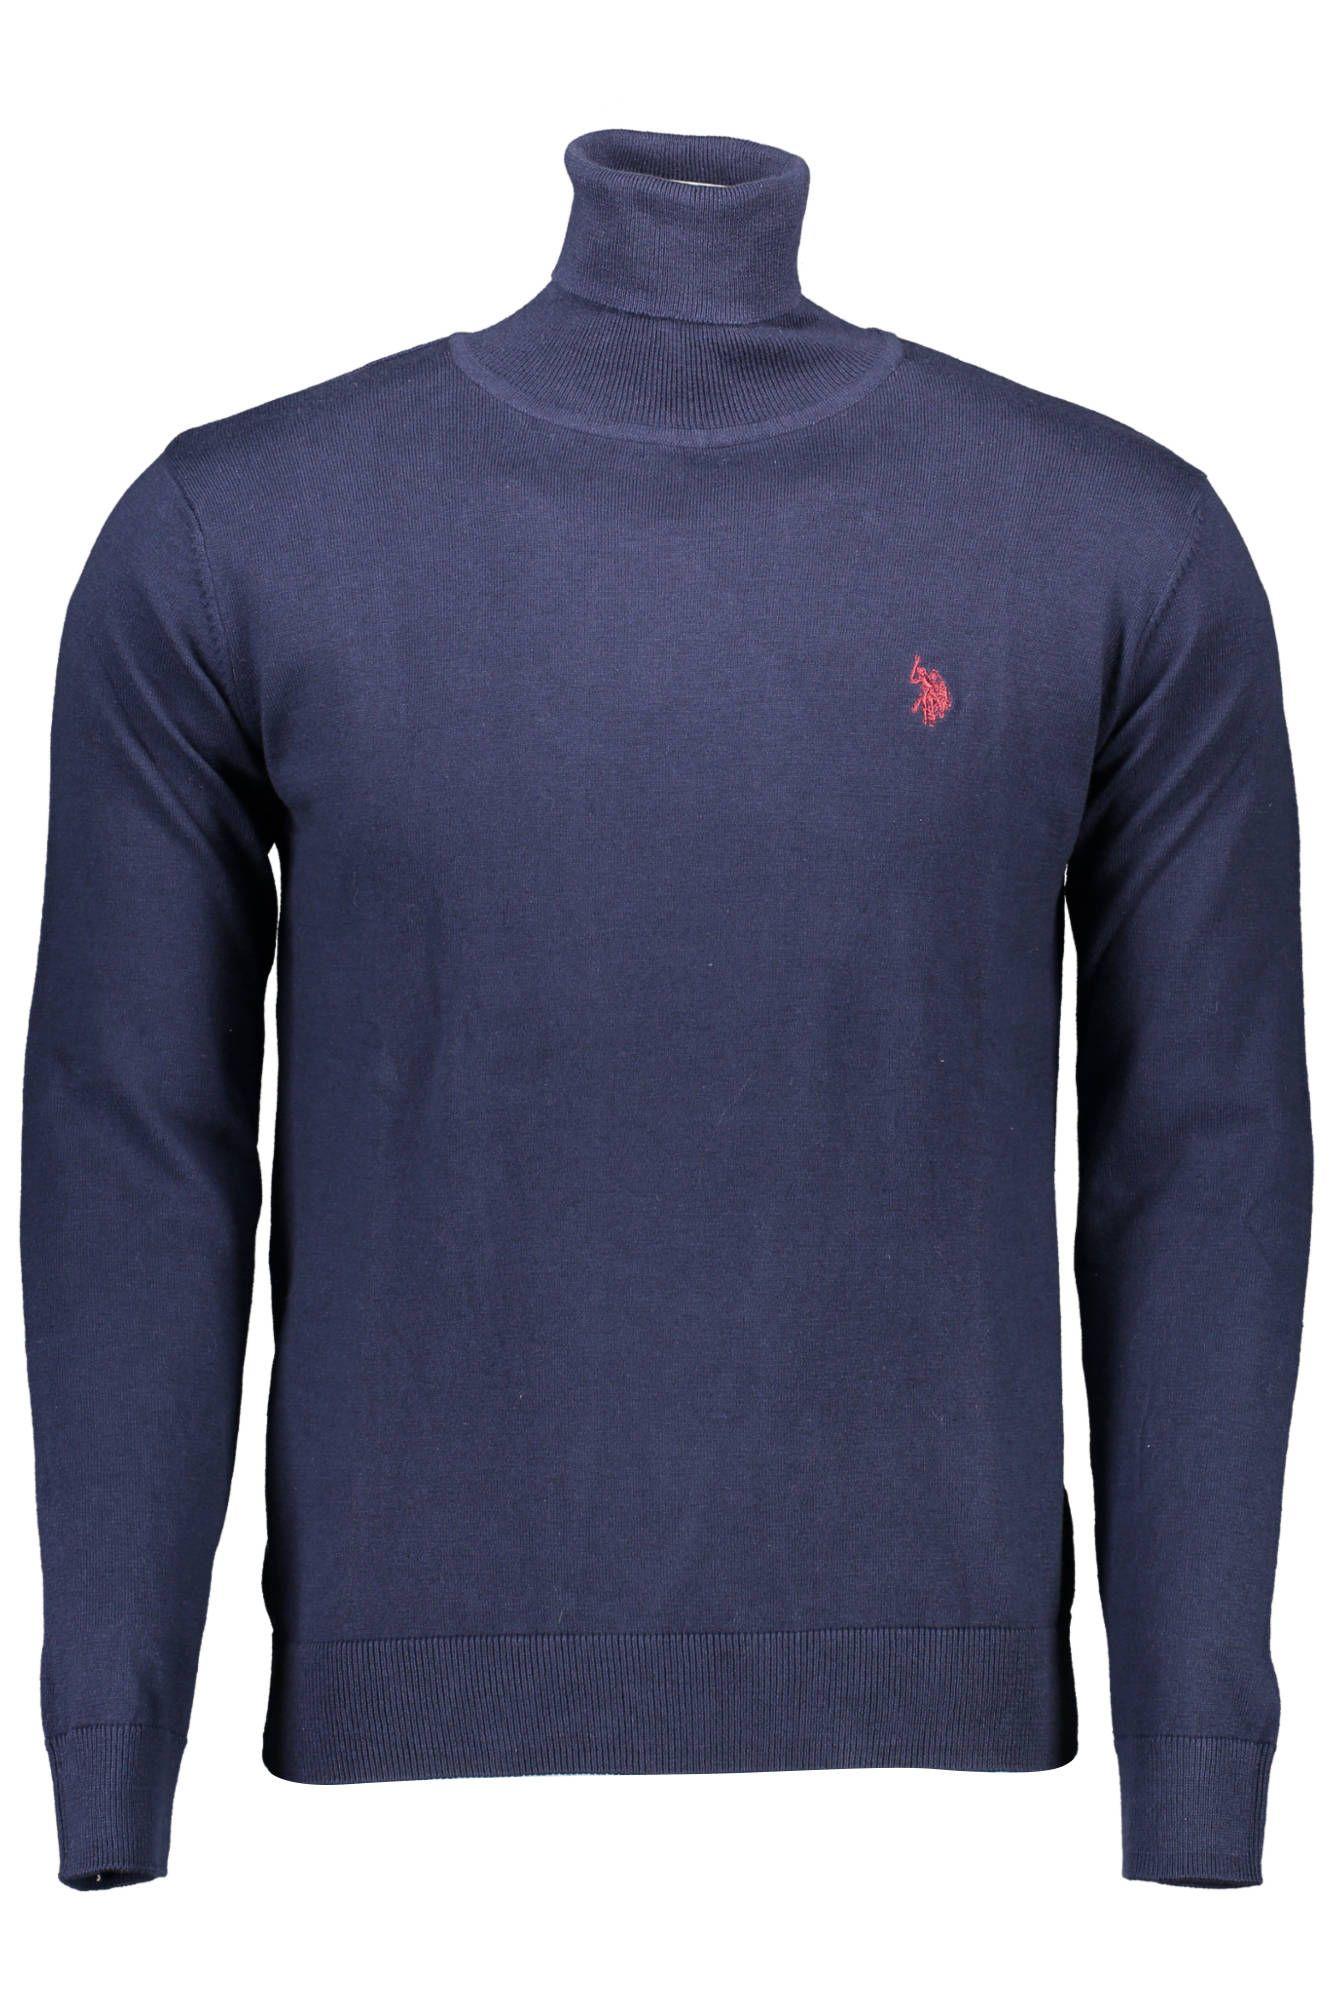 U.S. POLO ASSN. Cotton Sweater in Blue for Men | Lyst